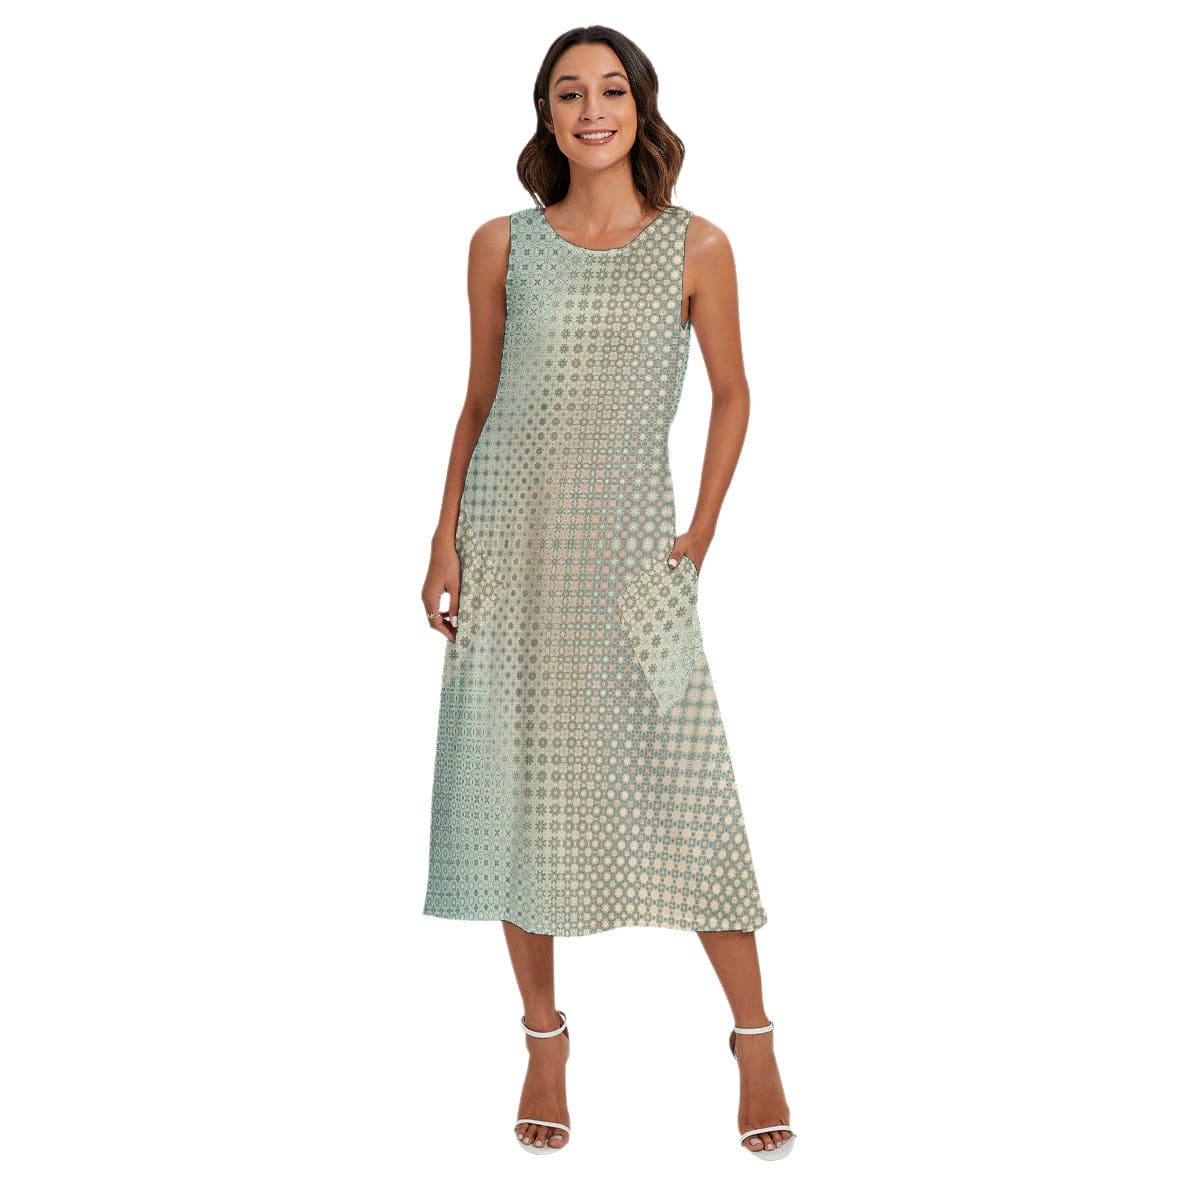 Sand and sea green patterned Women's  Easy going Sleeveless Dress With Diagonal Pocket, by Sensus sT